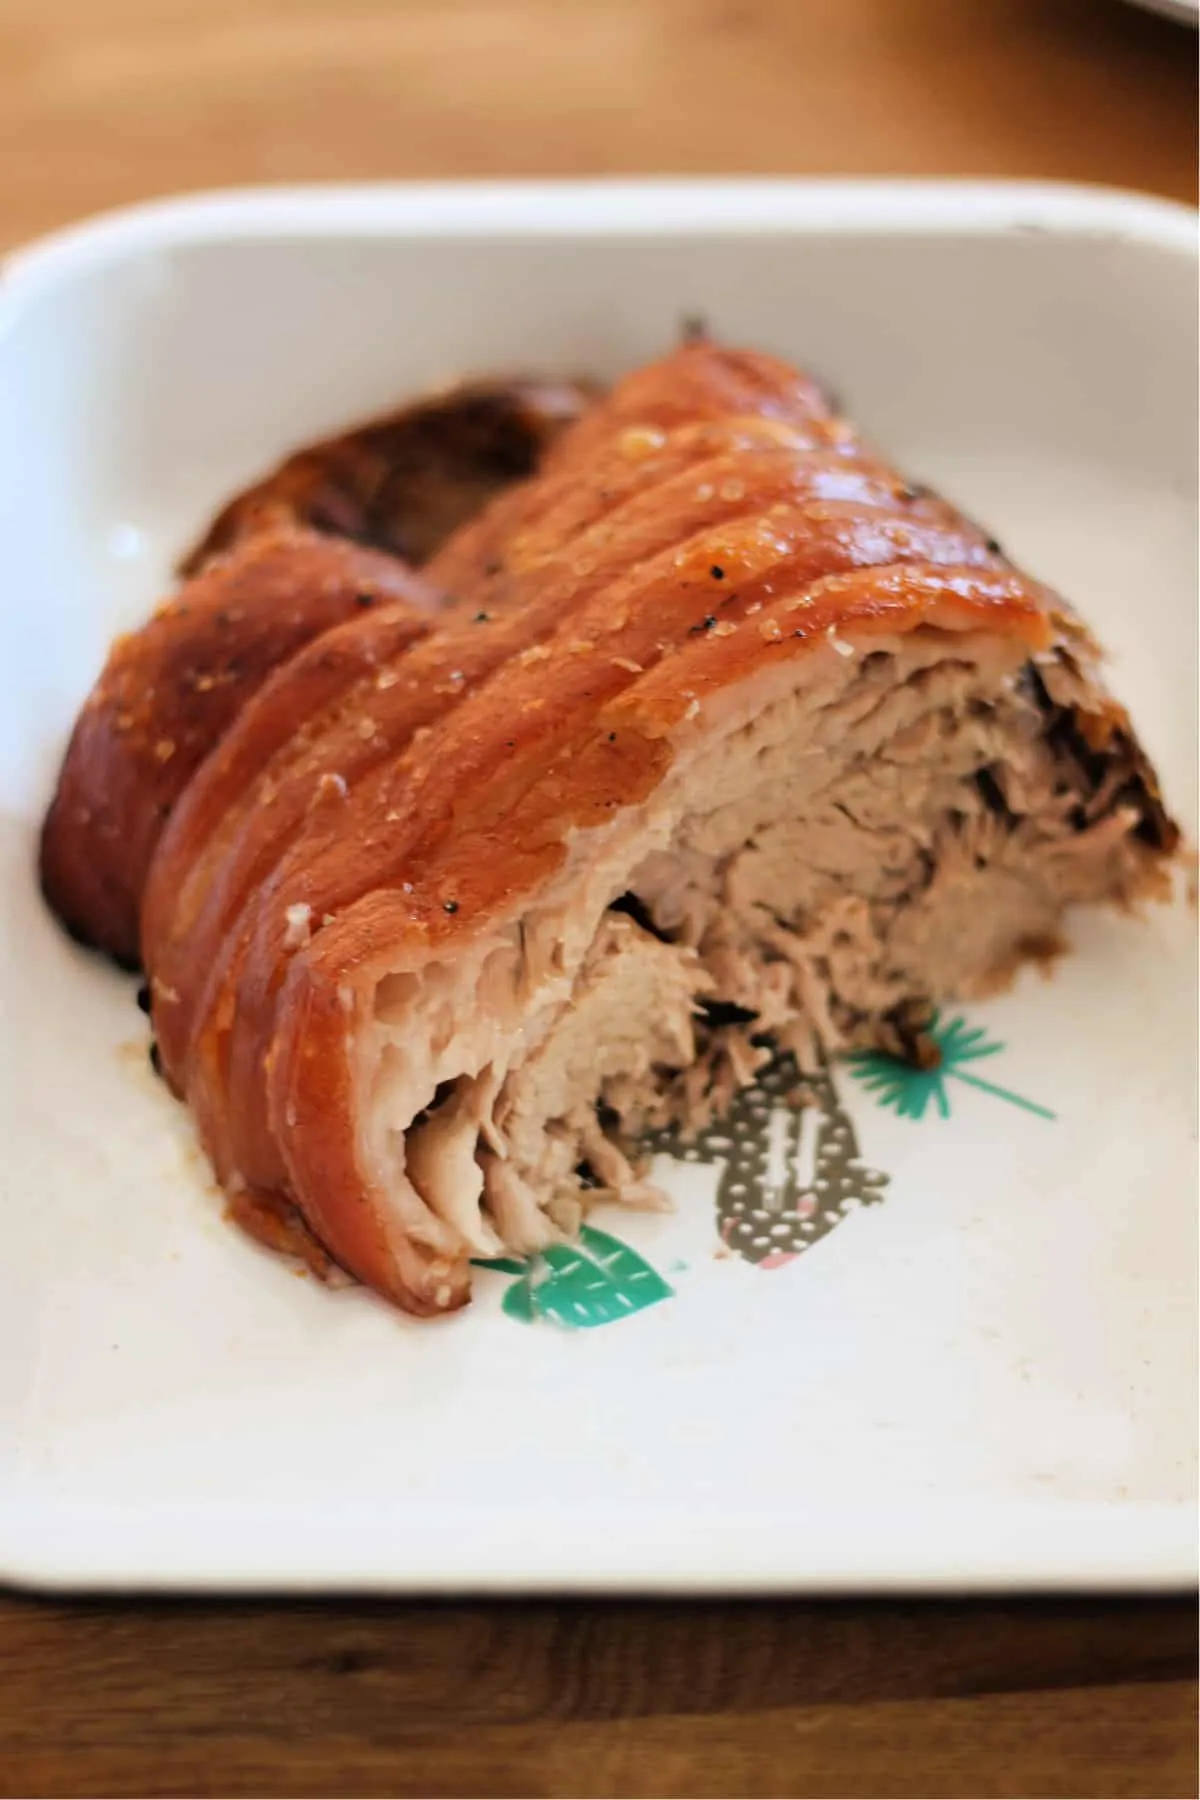 Roast pork joint in a serving dish, showing the soft meat inside.